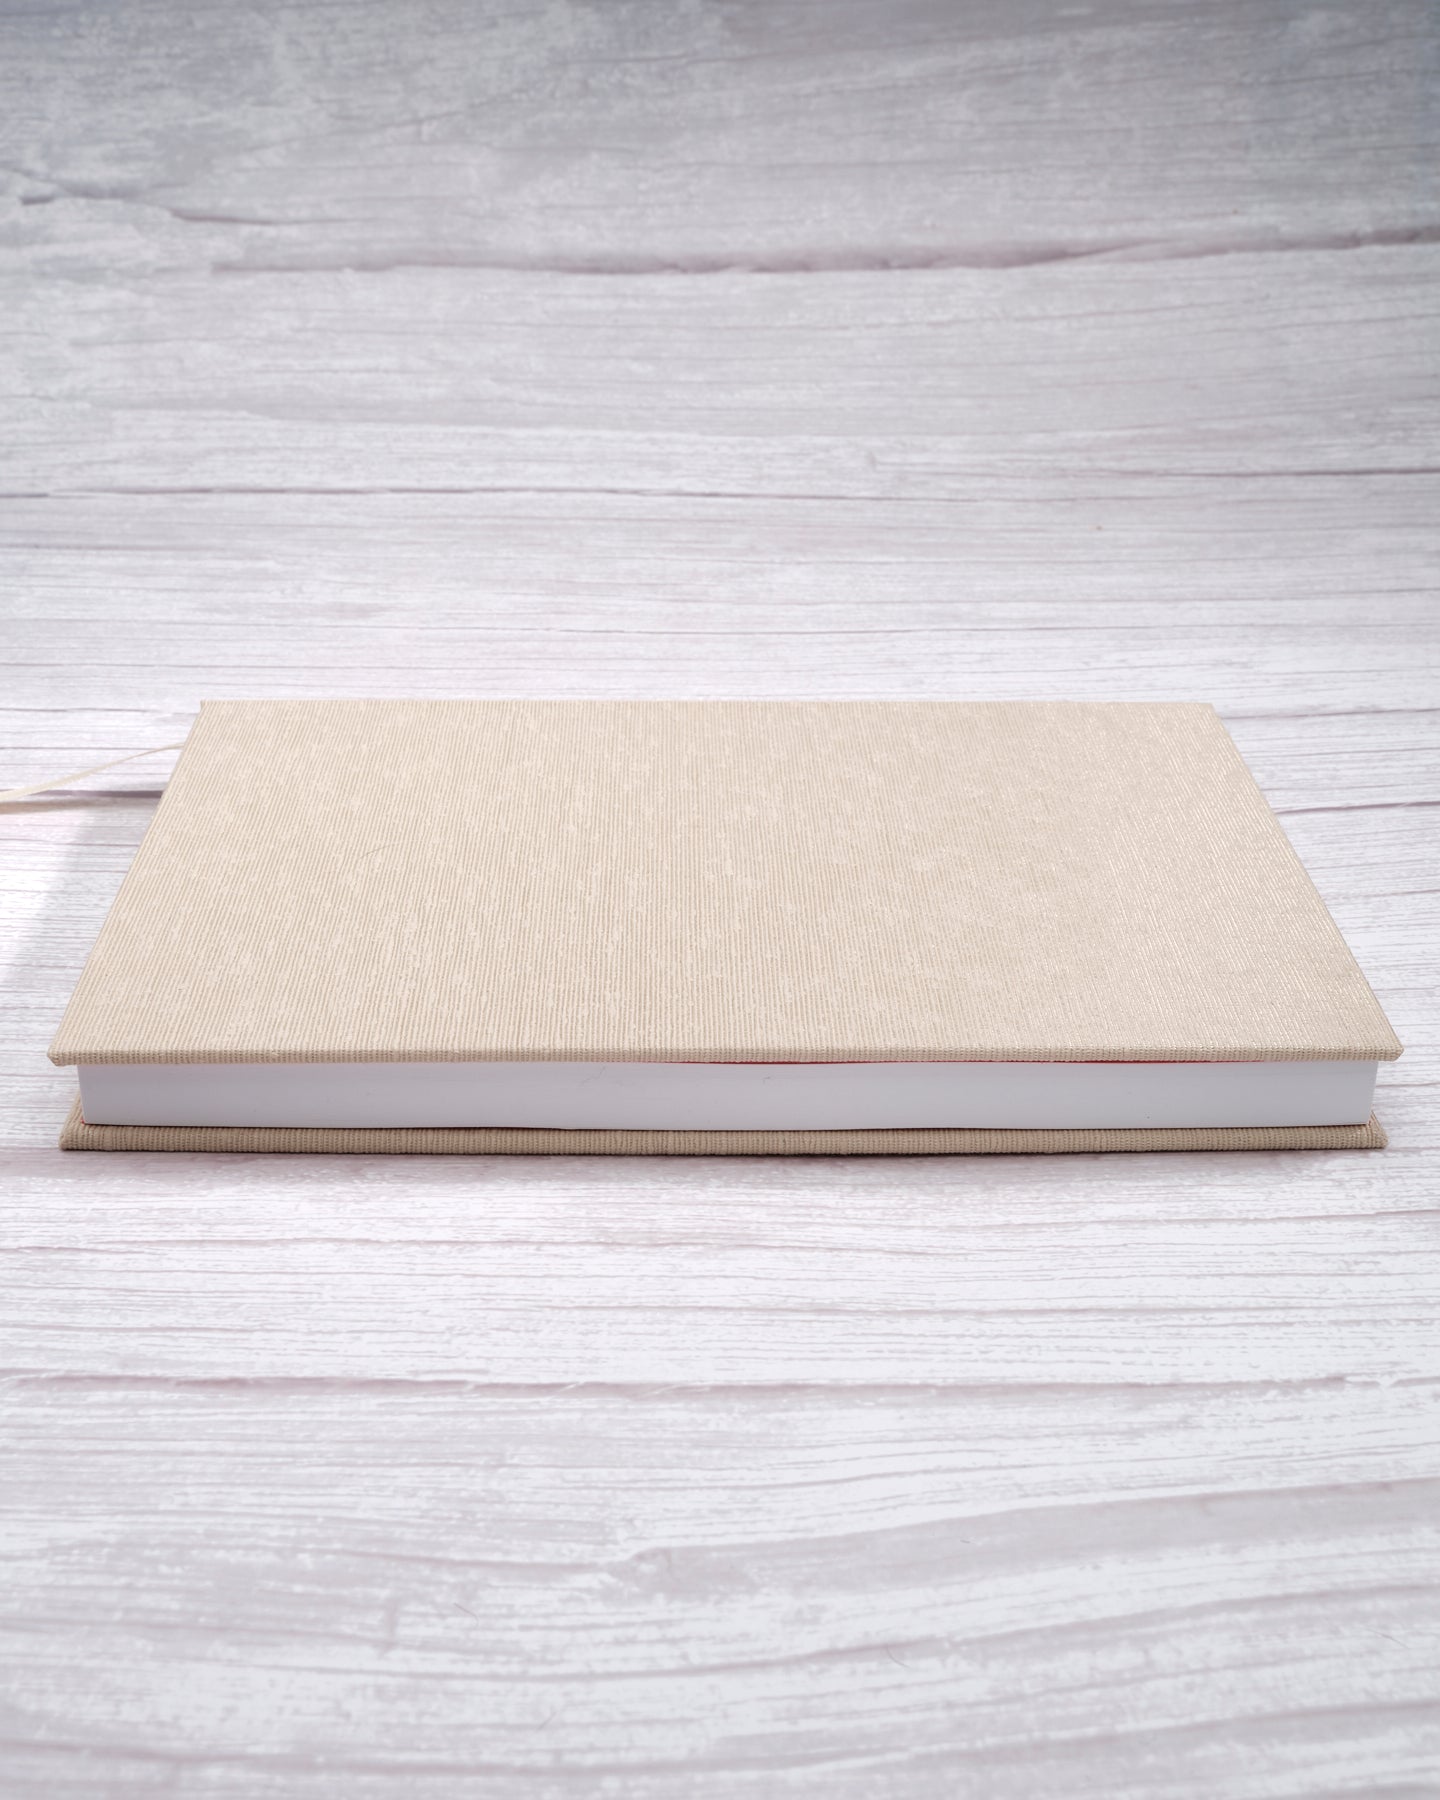 Platinum Japanese Bookcloth B5 Handcrafted Hardcover Notebook